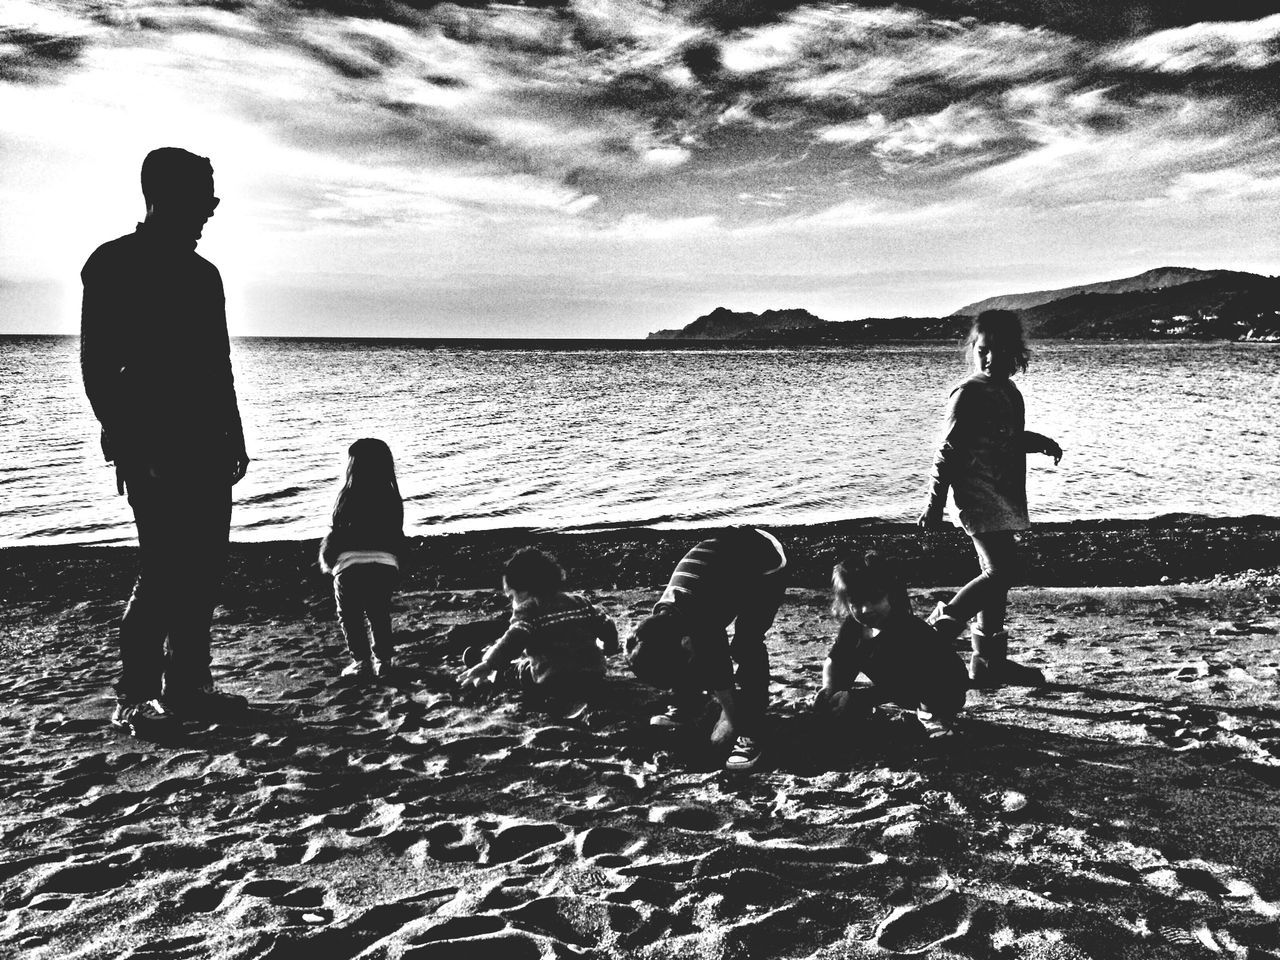 water, togetherness, lifestyles, leisure activity, sea, bonding, love, full length, sky, men, silhouette, family, boys, horizon over water, beach, friendship, standing